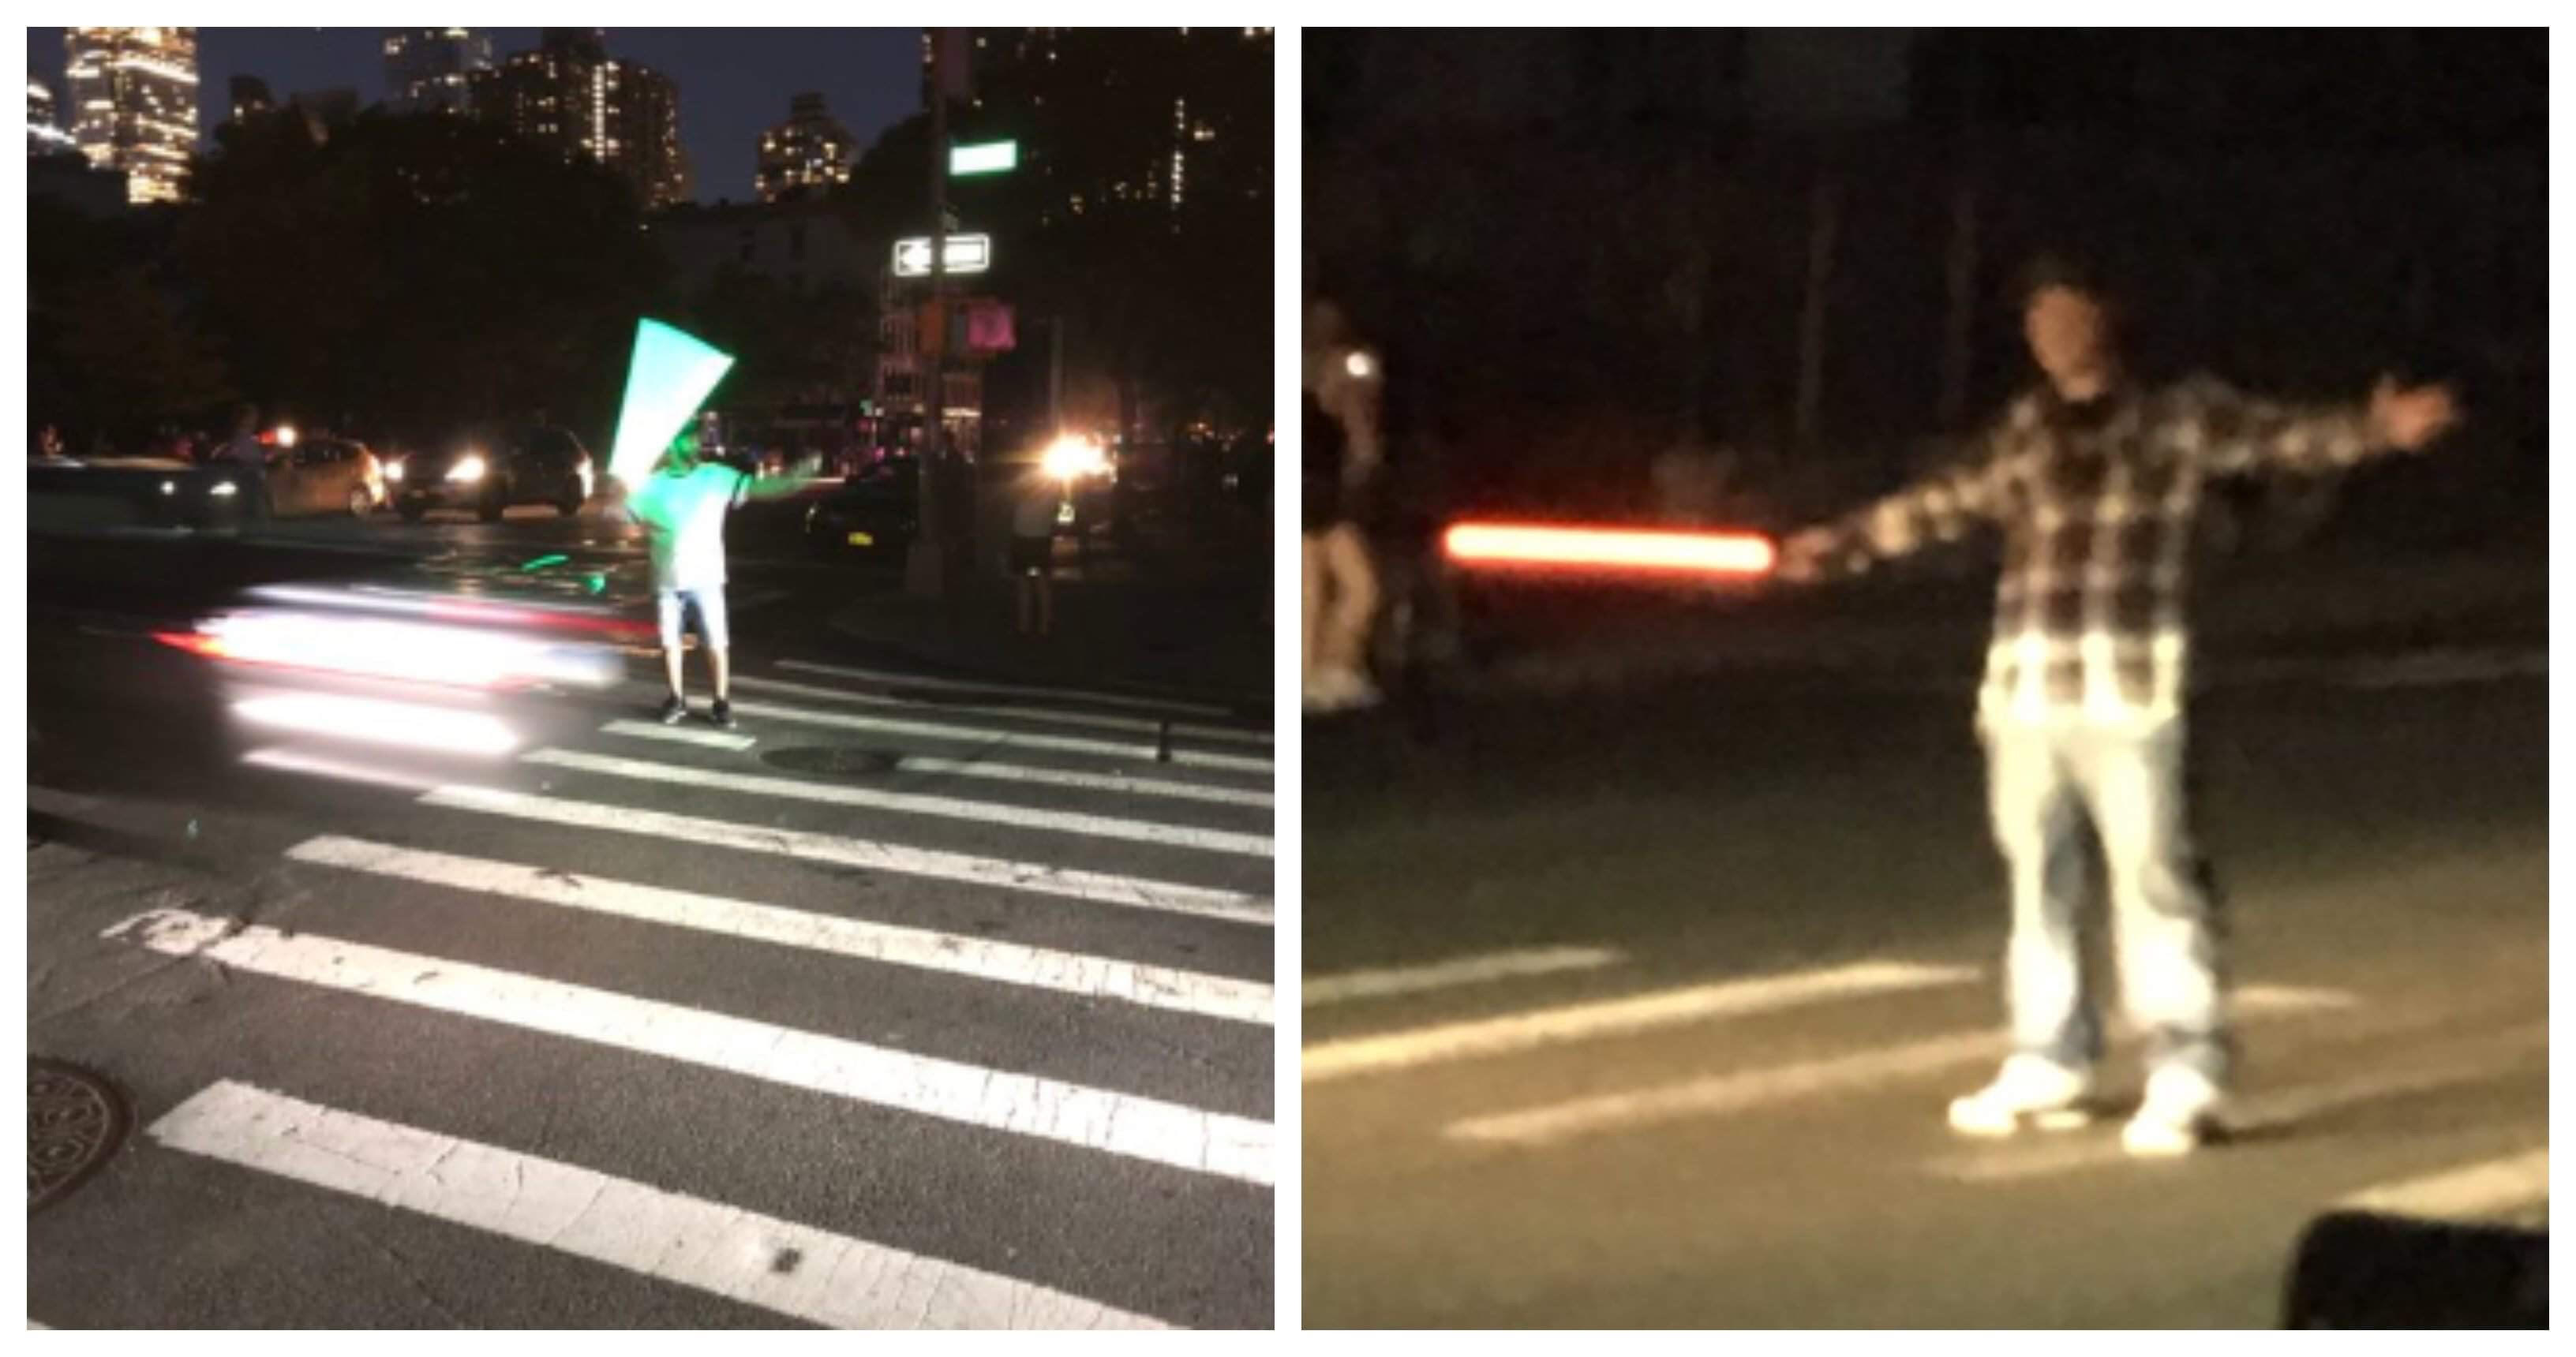 NYC Residents Use Lightsabers From Star Wars To Direct Traffic During Blackout